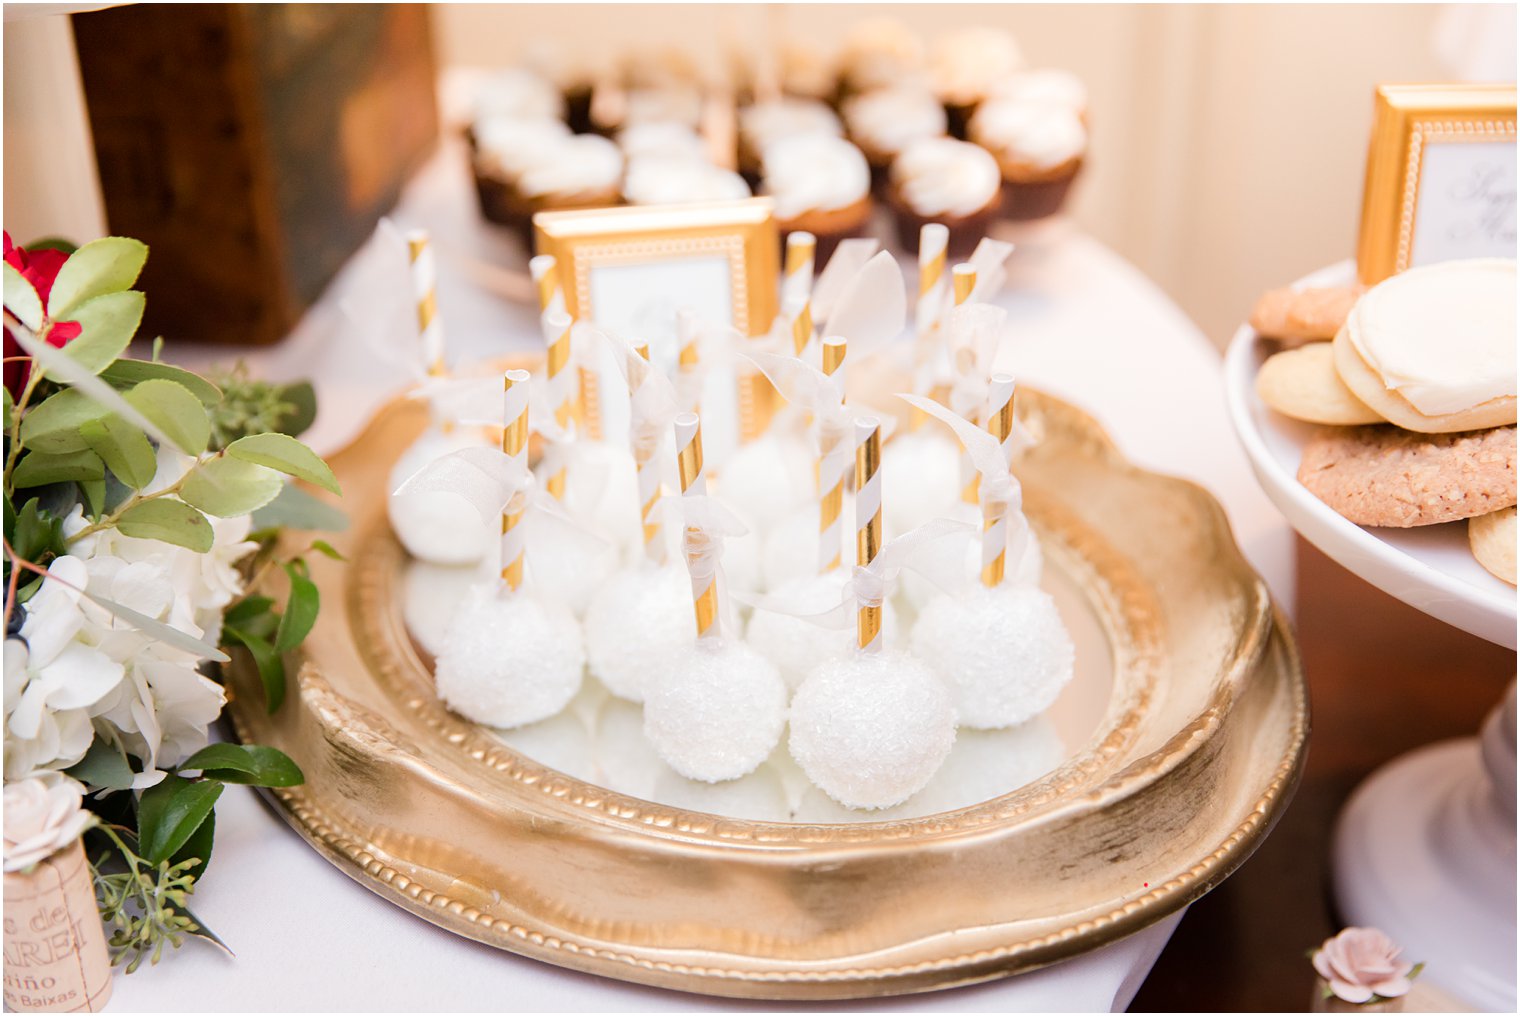 cake pops for wedding reception by Patty Cakes at Lake Mohawk Country Club 